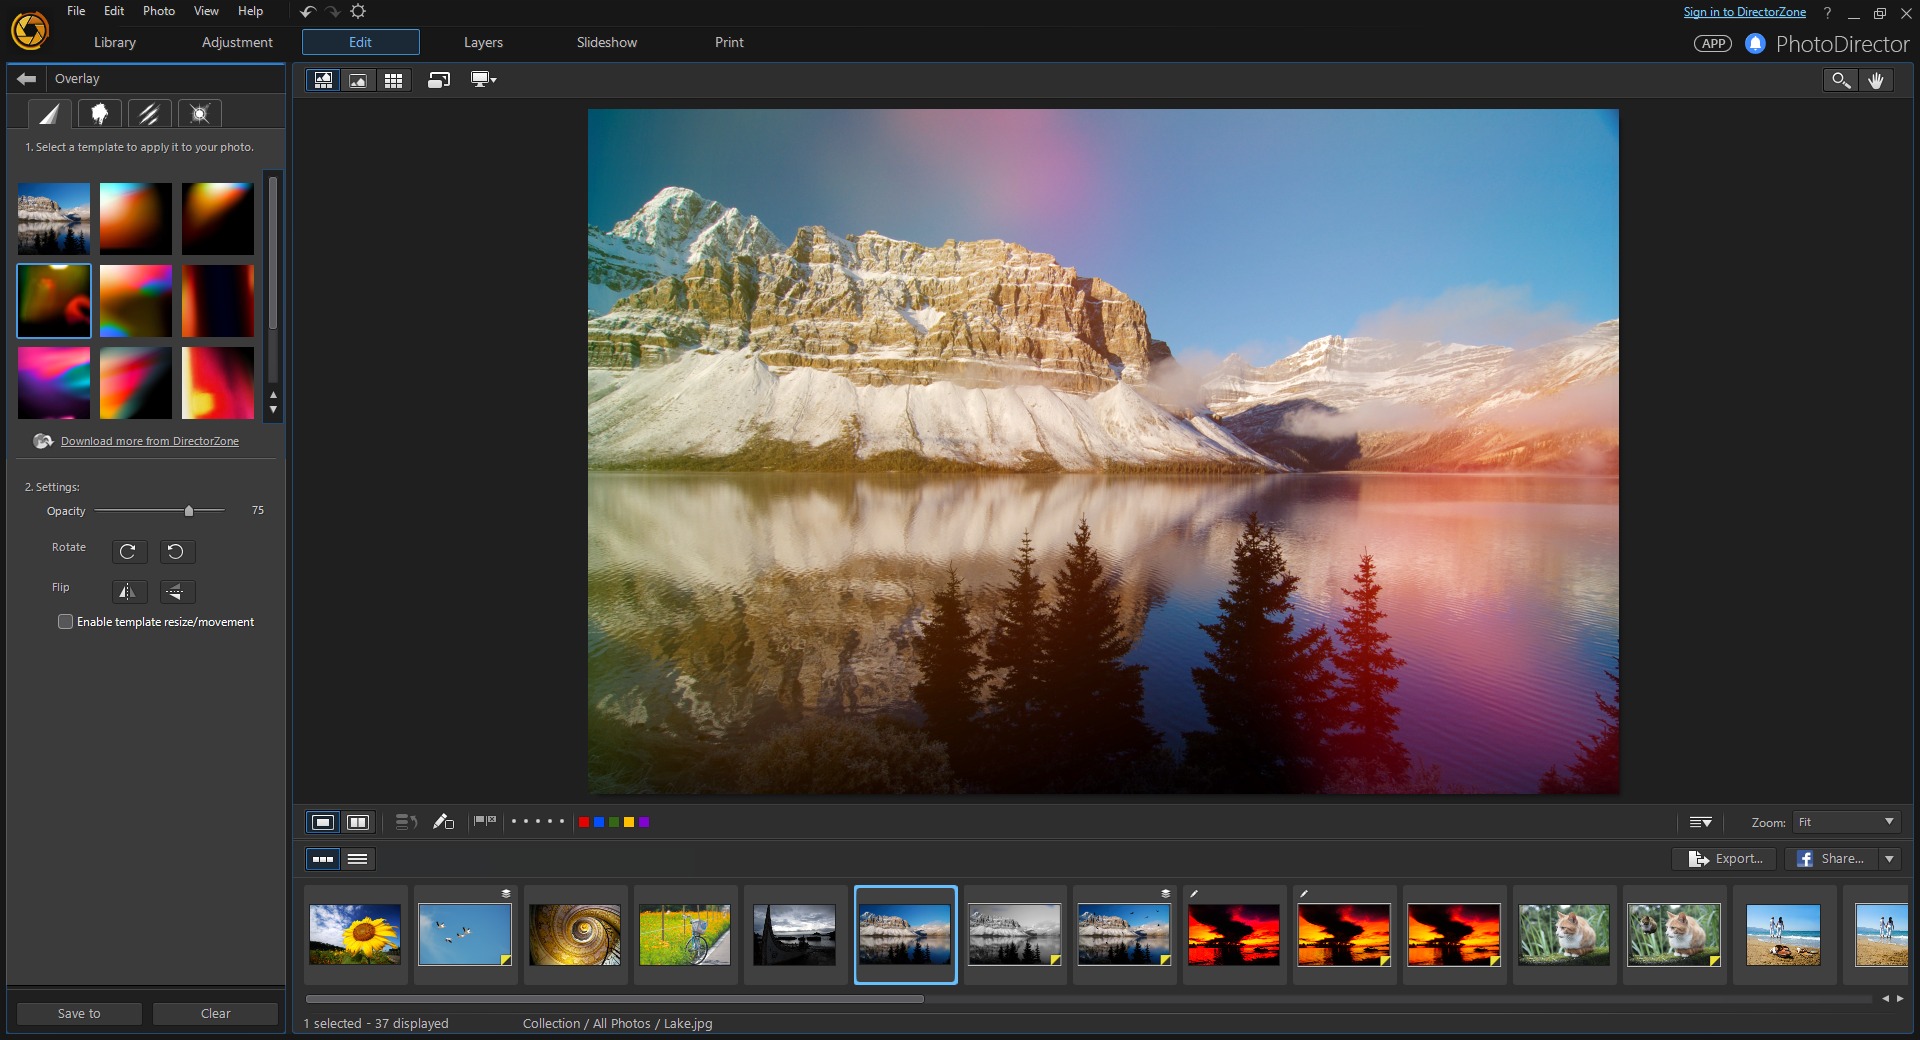 CyberLink PhotoDirector 5 review – The best photo editing software for the casual users